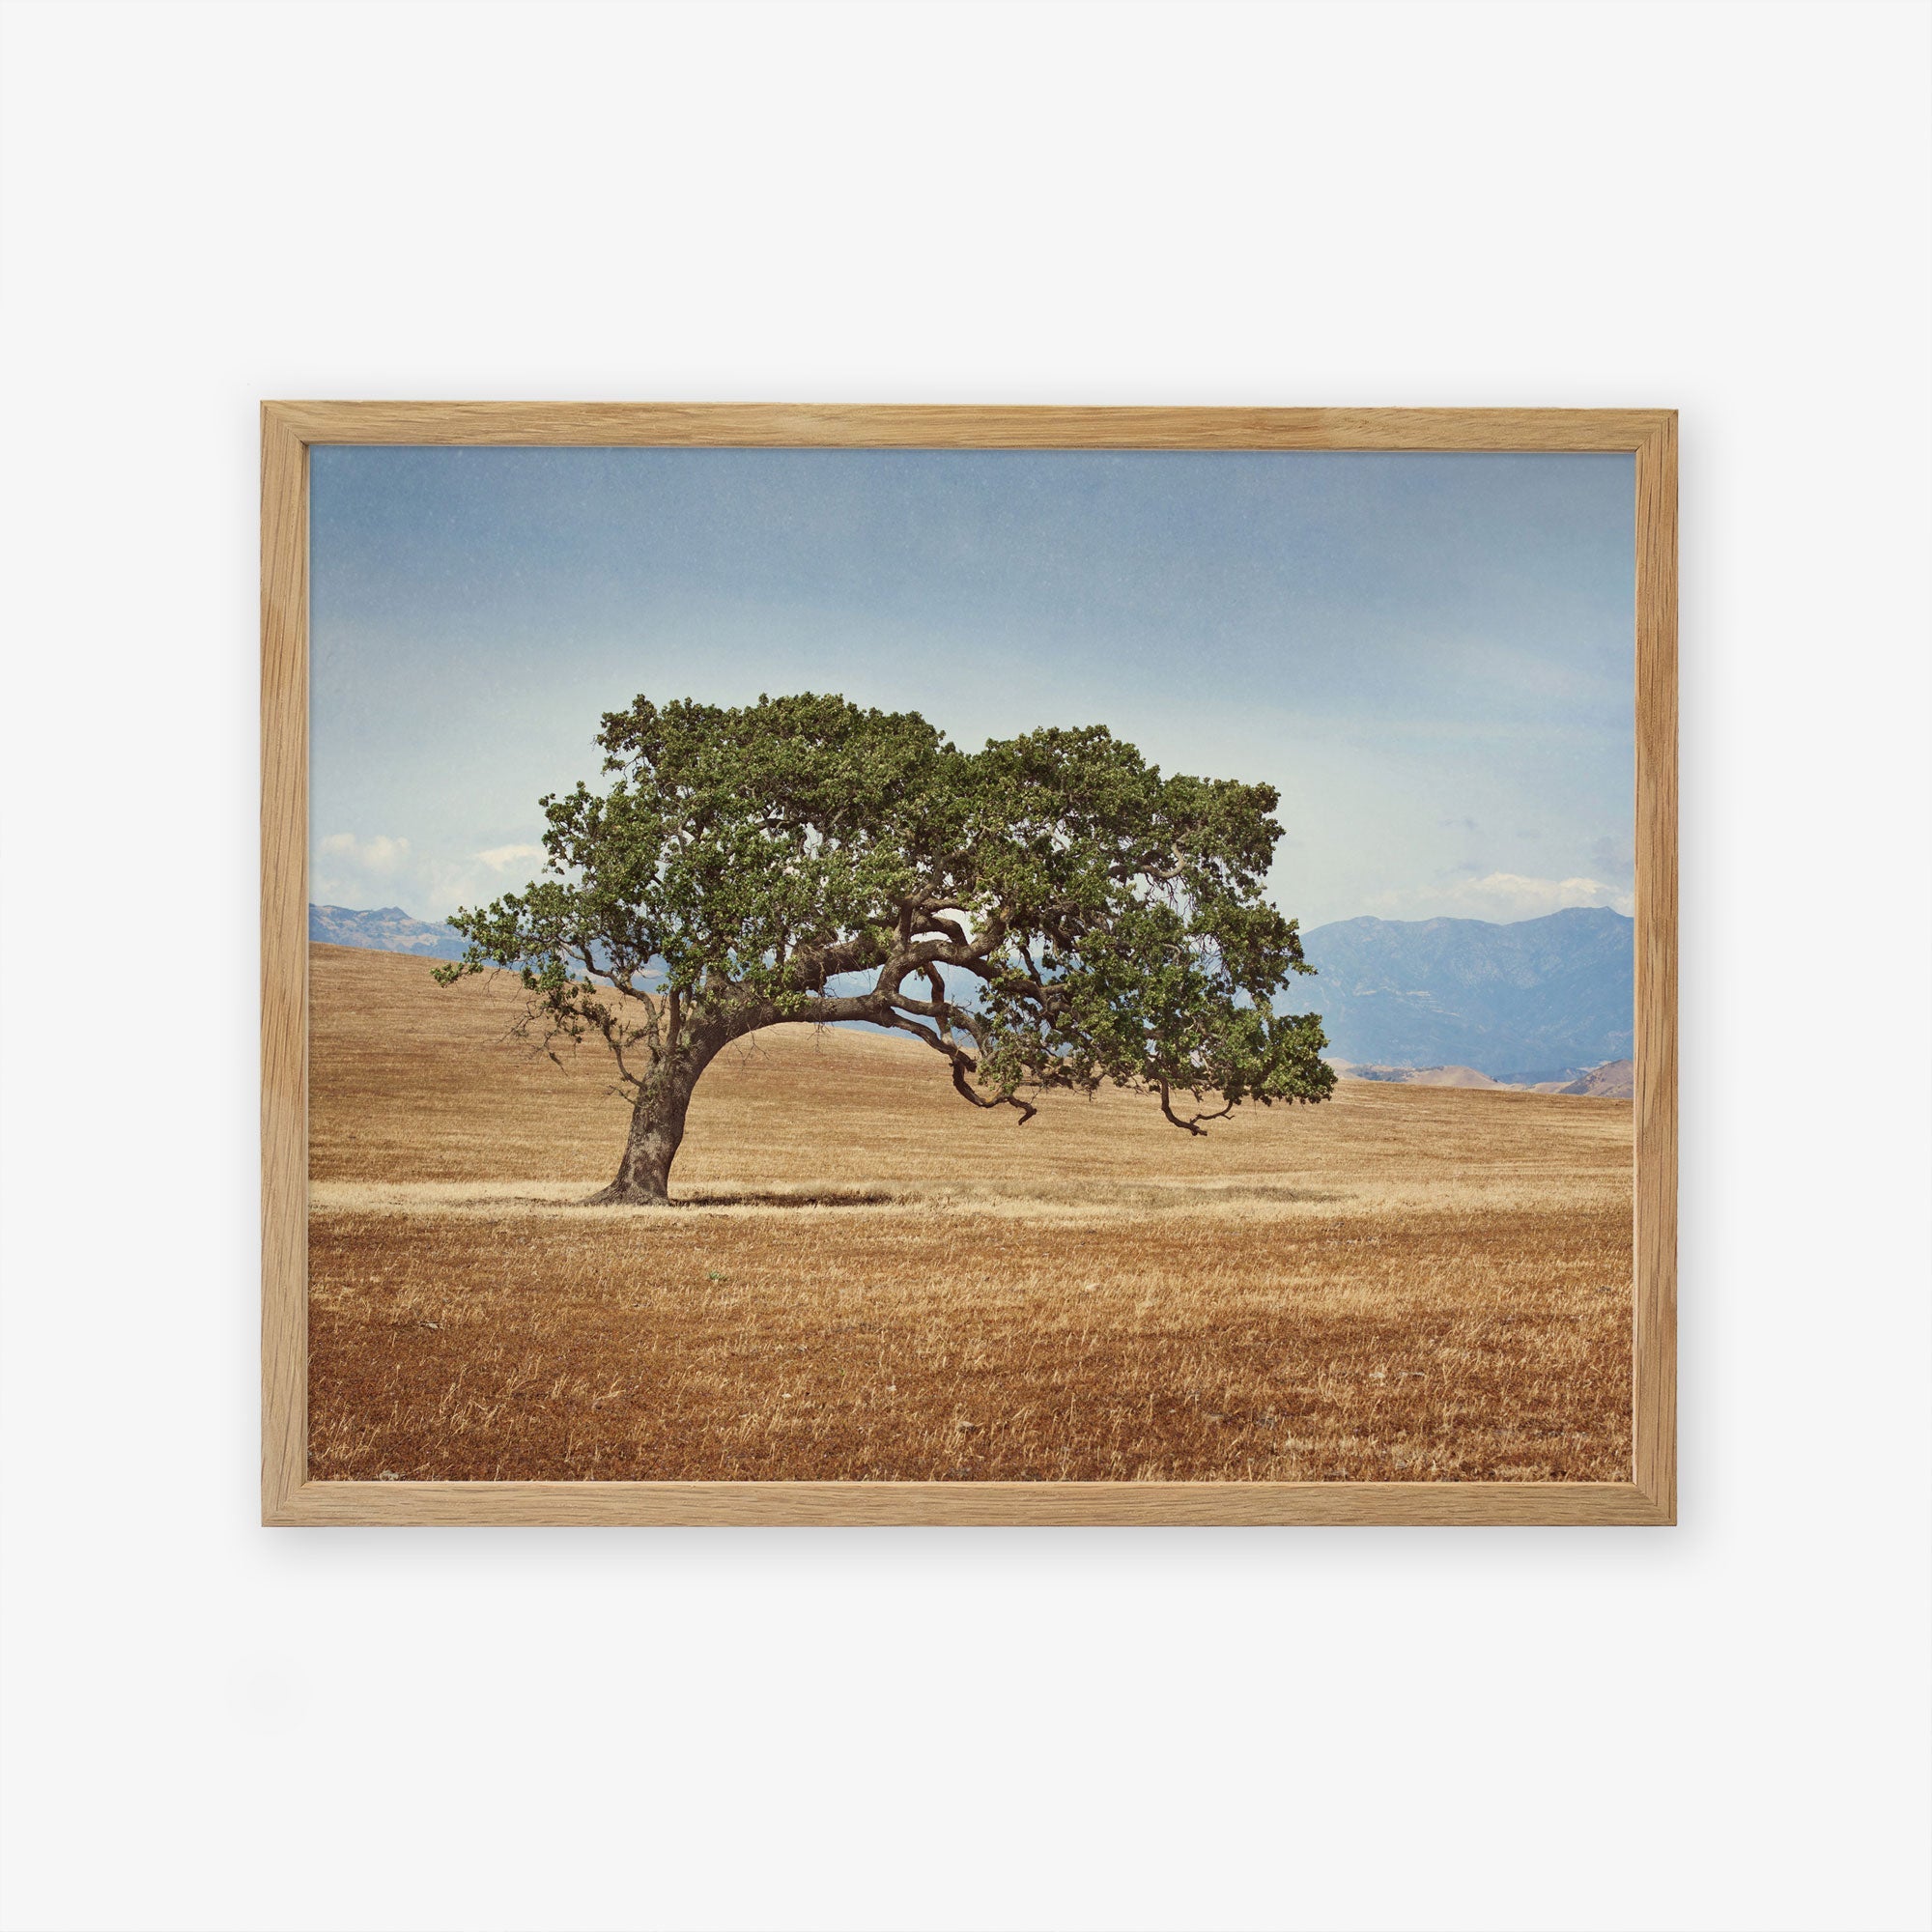 A framed realistic painting of a solitary California Oak Tree Print, &#39;Windswept&#39; with a lush canopy in a golden field of the Santa Ynez Valley, set against a backdrop of distant blue mountains under a clear sky by Offley Green.